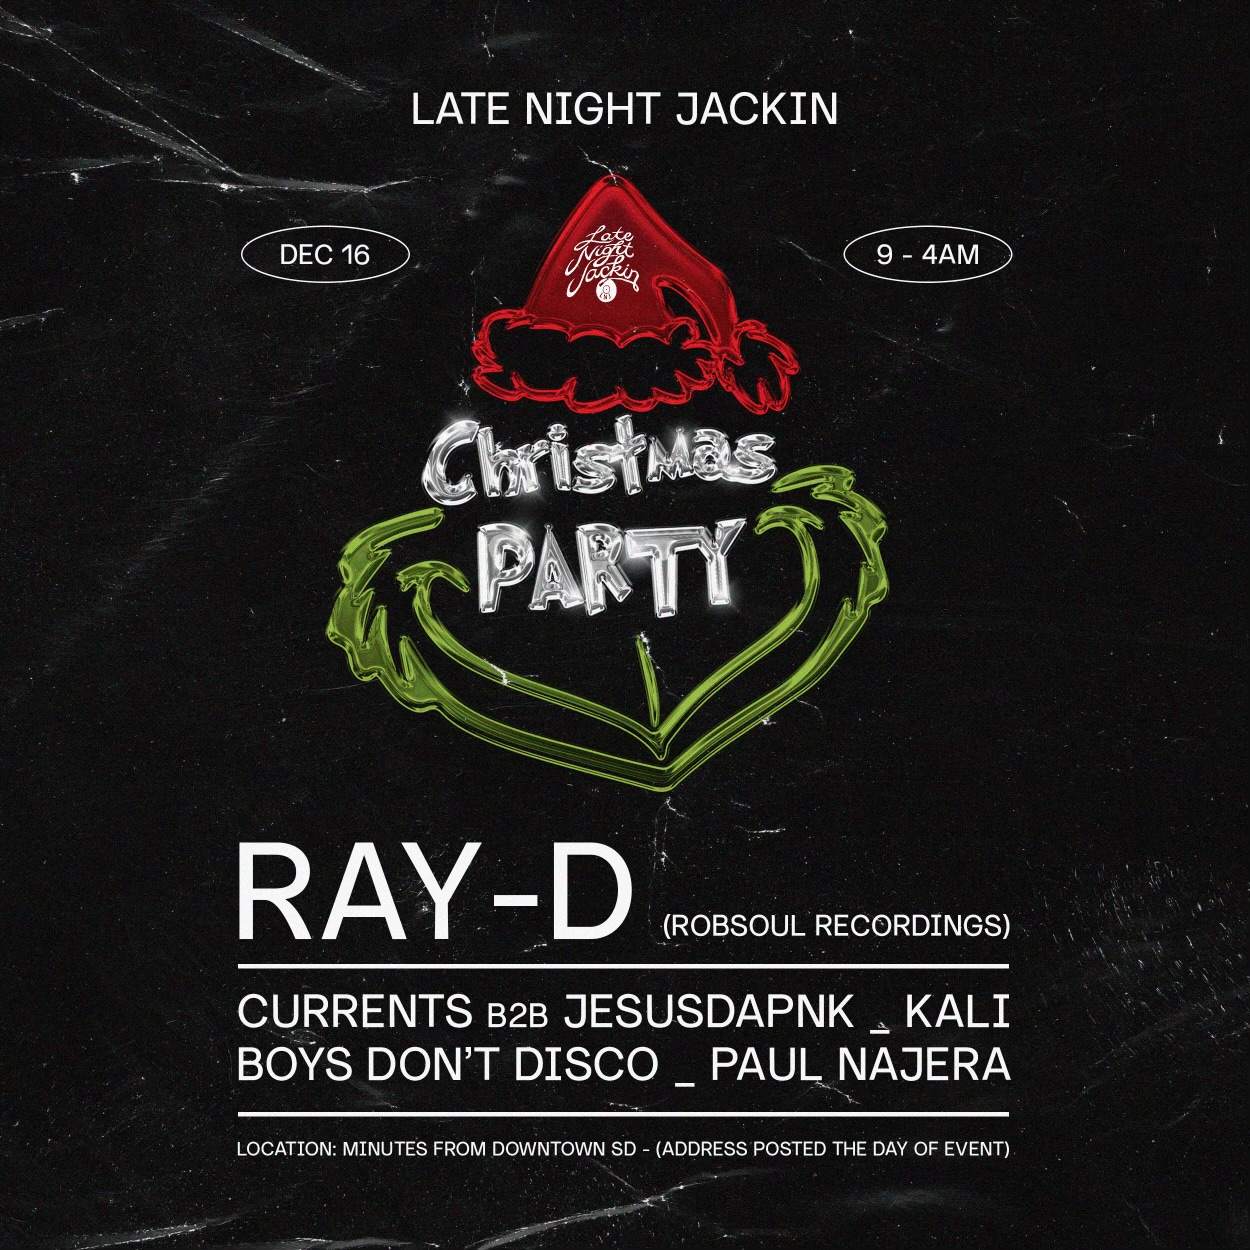 Late Night Jackin Christmas Party - フライヤー表